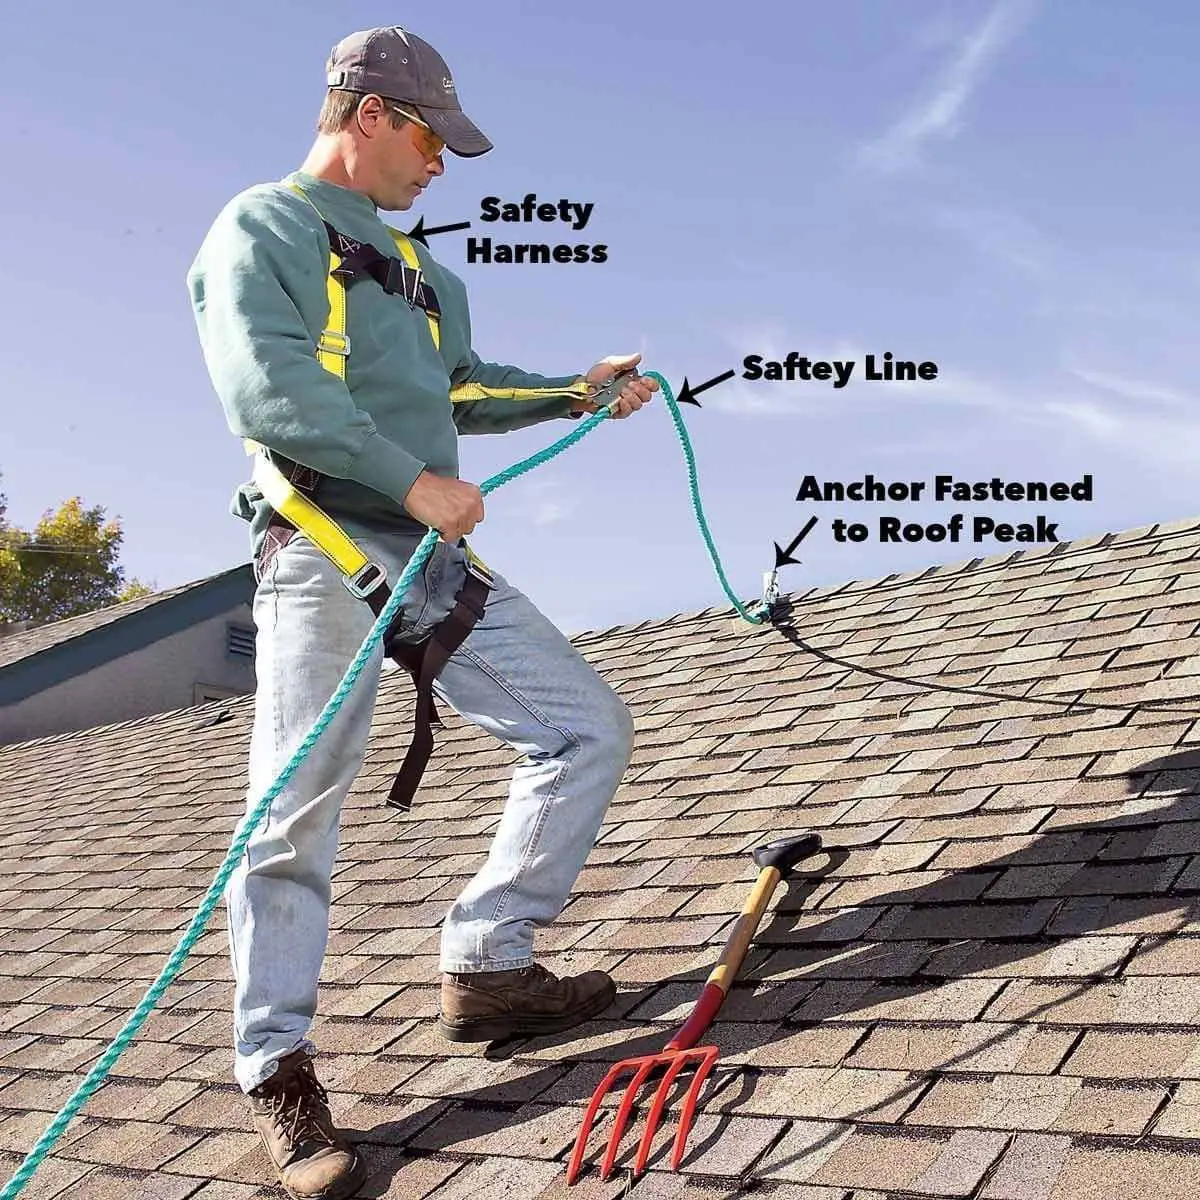 SUMMERTIME ROOF SAFETY REMINDERS